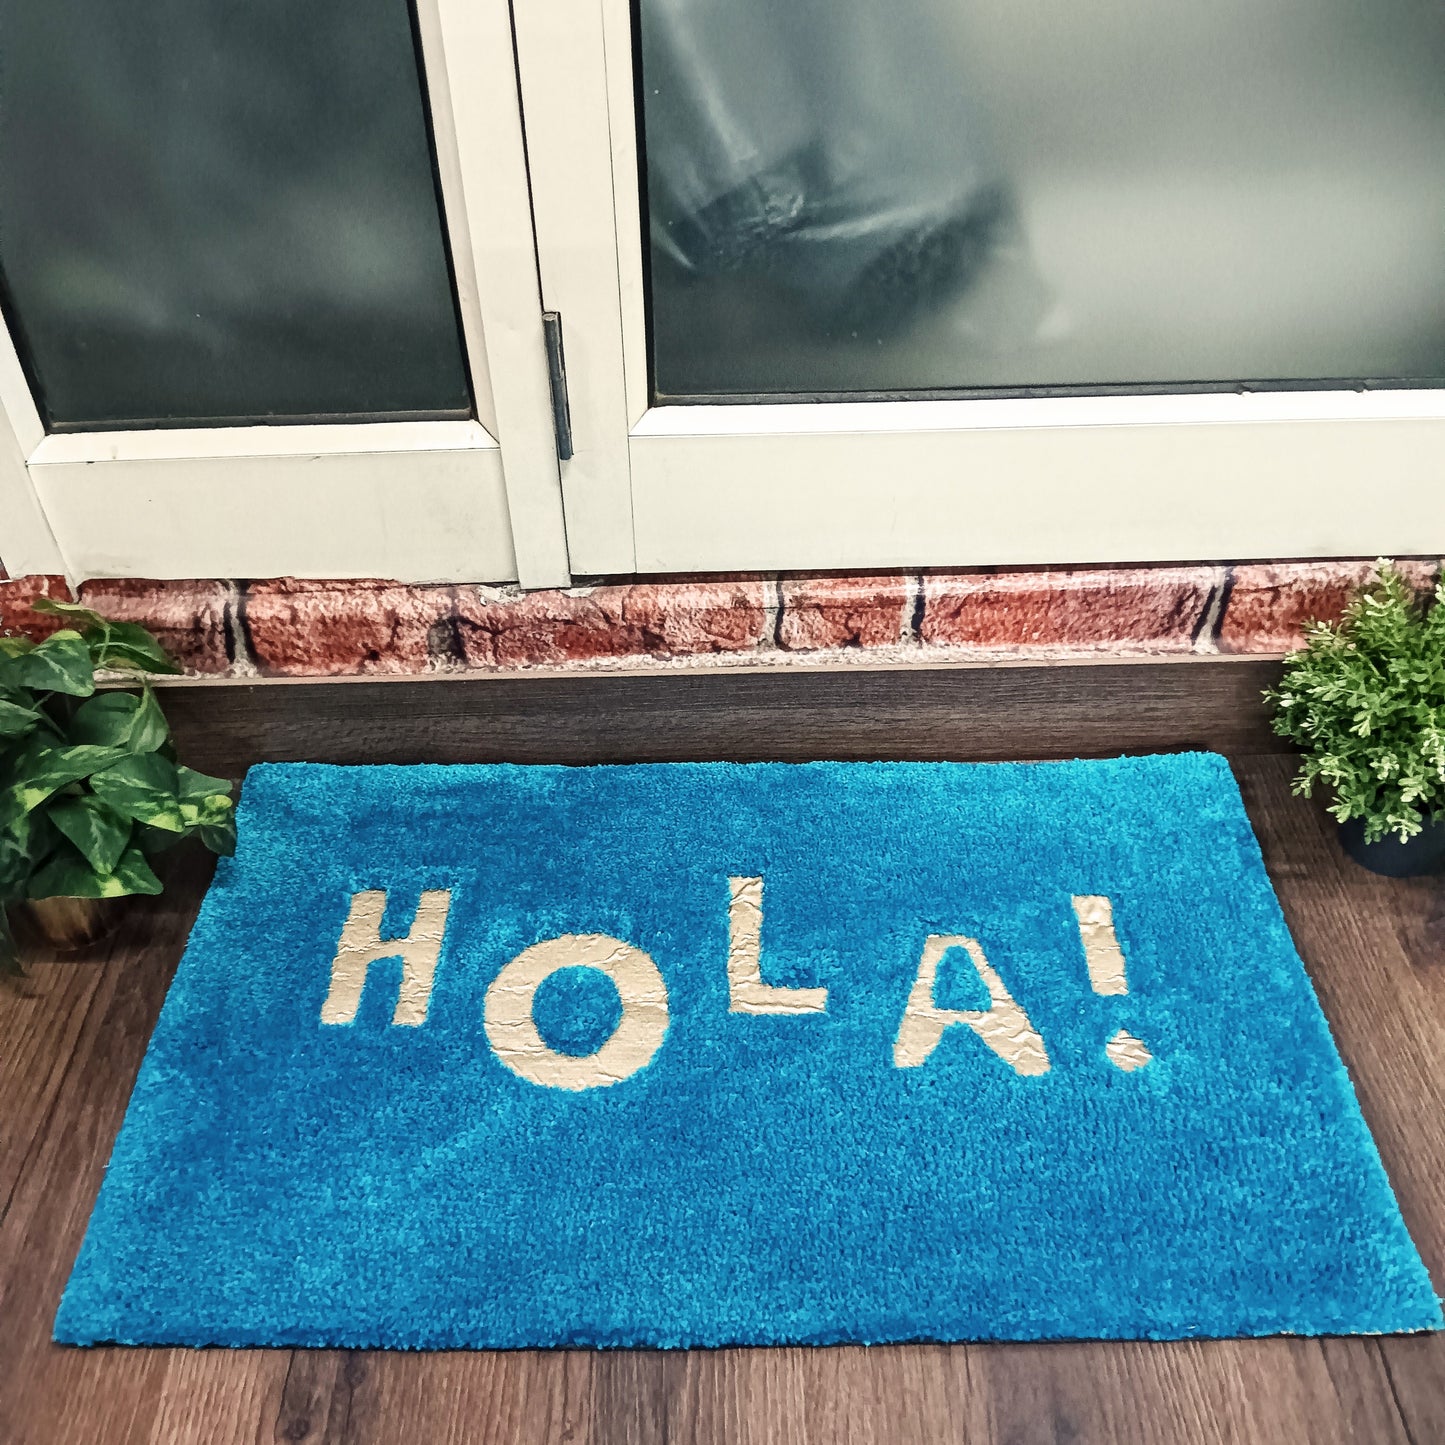 Avioni Divine Collection | Luxury Golden Touch Tufted Rug In "HOLA" (Spanish Greeting) Soft And Plush Handmade Door Mats | Pooja Mats | BathMats | Different Sizes